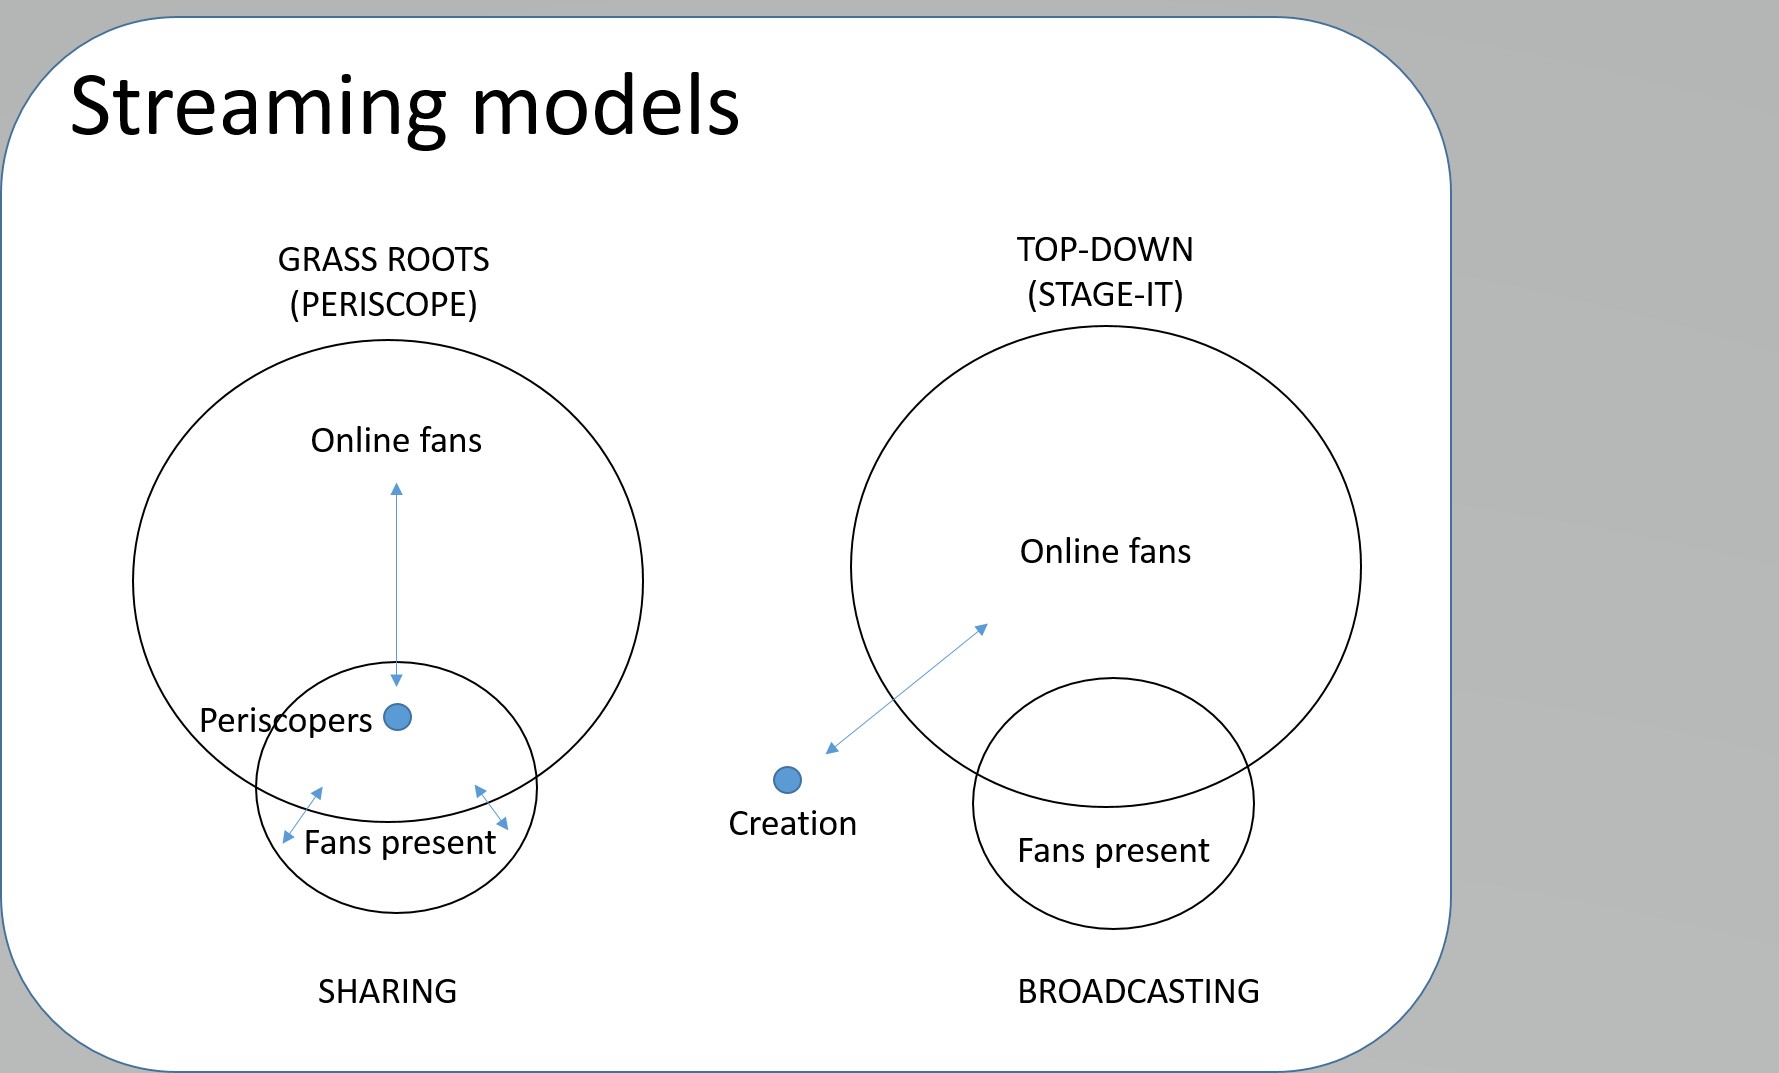 Comparison of streaming models. Diagram consisting of circles and text to illustrate two contrasting models. On the left- and right-hand sides are 2 circles that overlap, with the smaller one protruding out the bottom of the larger. The larger circles are labeled 'Online fans' and the smaller circles are labeled 'Fans present.'  Left-hand side model is labeled GRASS ROOTS (PERISCOPE). A blue dot labeled Periscopers sits within the overlapping space of the two circles. A double ended arrow links Periscopers with the circle representing Online Fans. two smaller double ended arrows connect the spaces of the 'fans present' circle which do and do not overlap with the Online fans circle. Under the model: SHARING The right hand side model is labeled TOP-DOWN (STAGE-IT). A blue dot labeled Creation sits outside of both circles. A double ended arrow links Creation and the circle representing Online fans. Under the model: BROADCASTING.